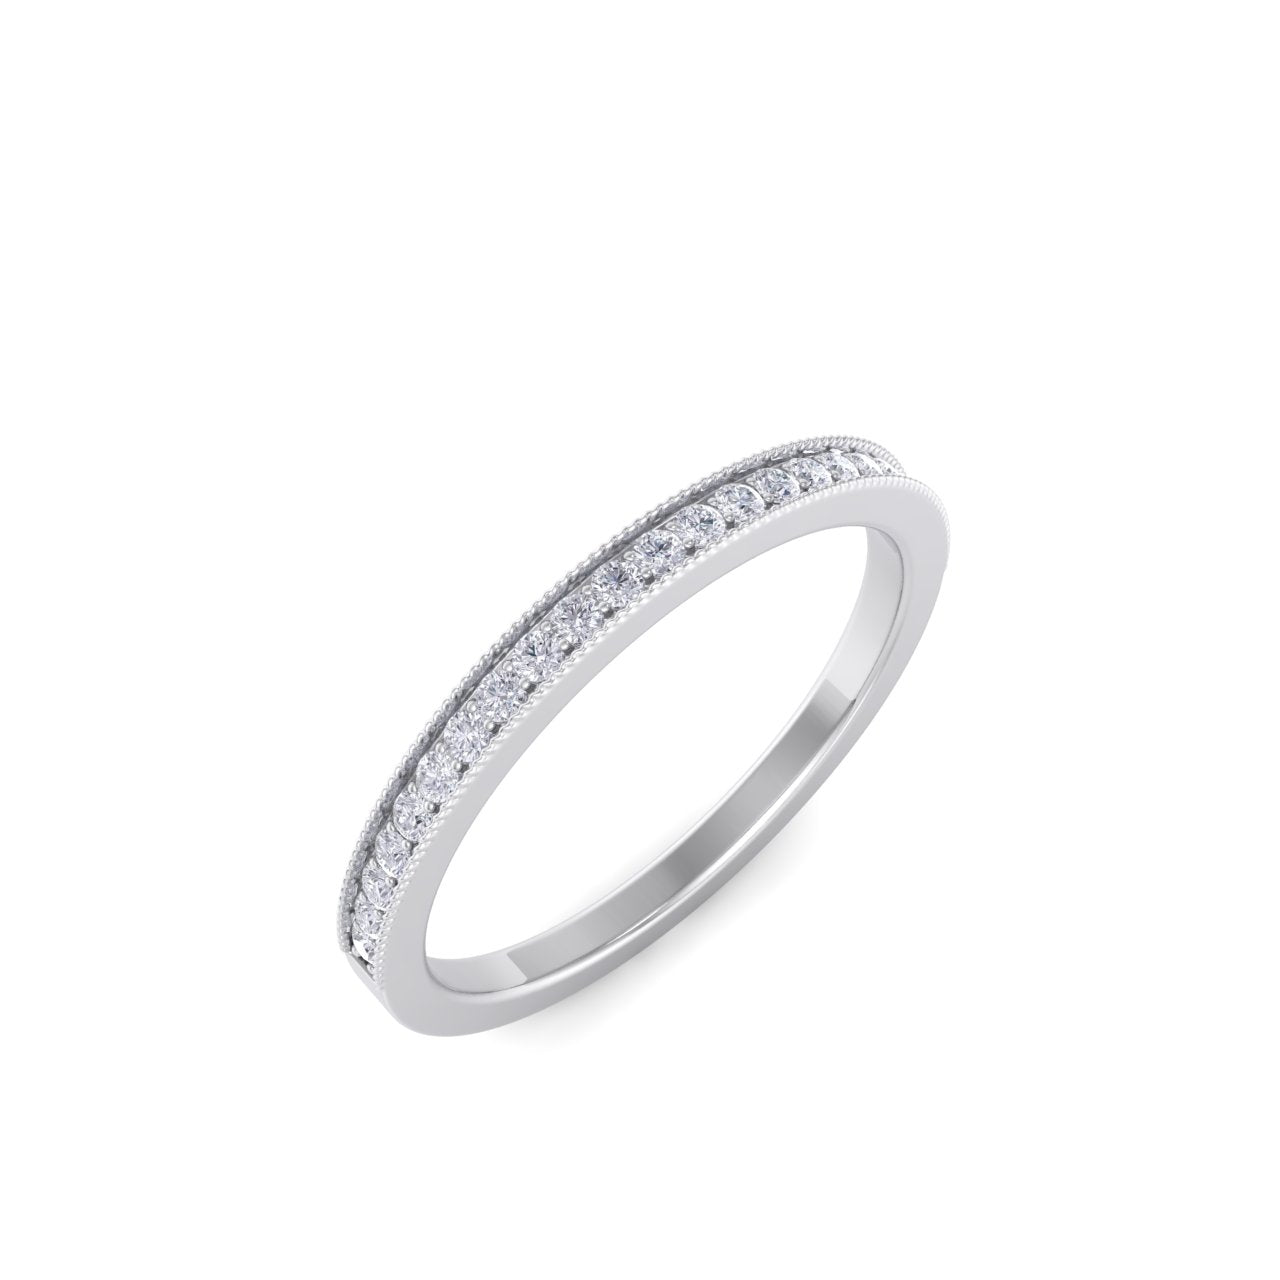 Diamond ring in white gold with white diamonds of 0.15 ct in weight